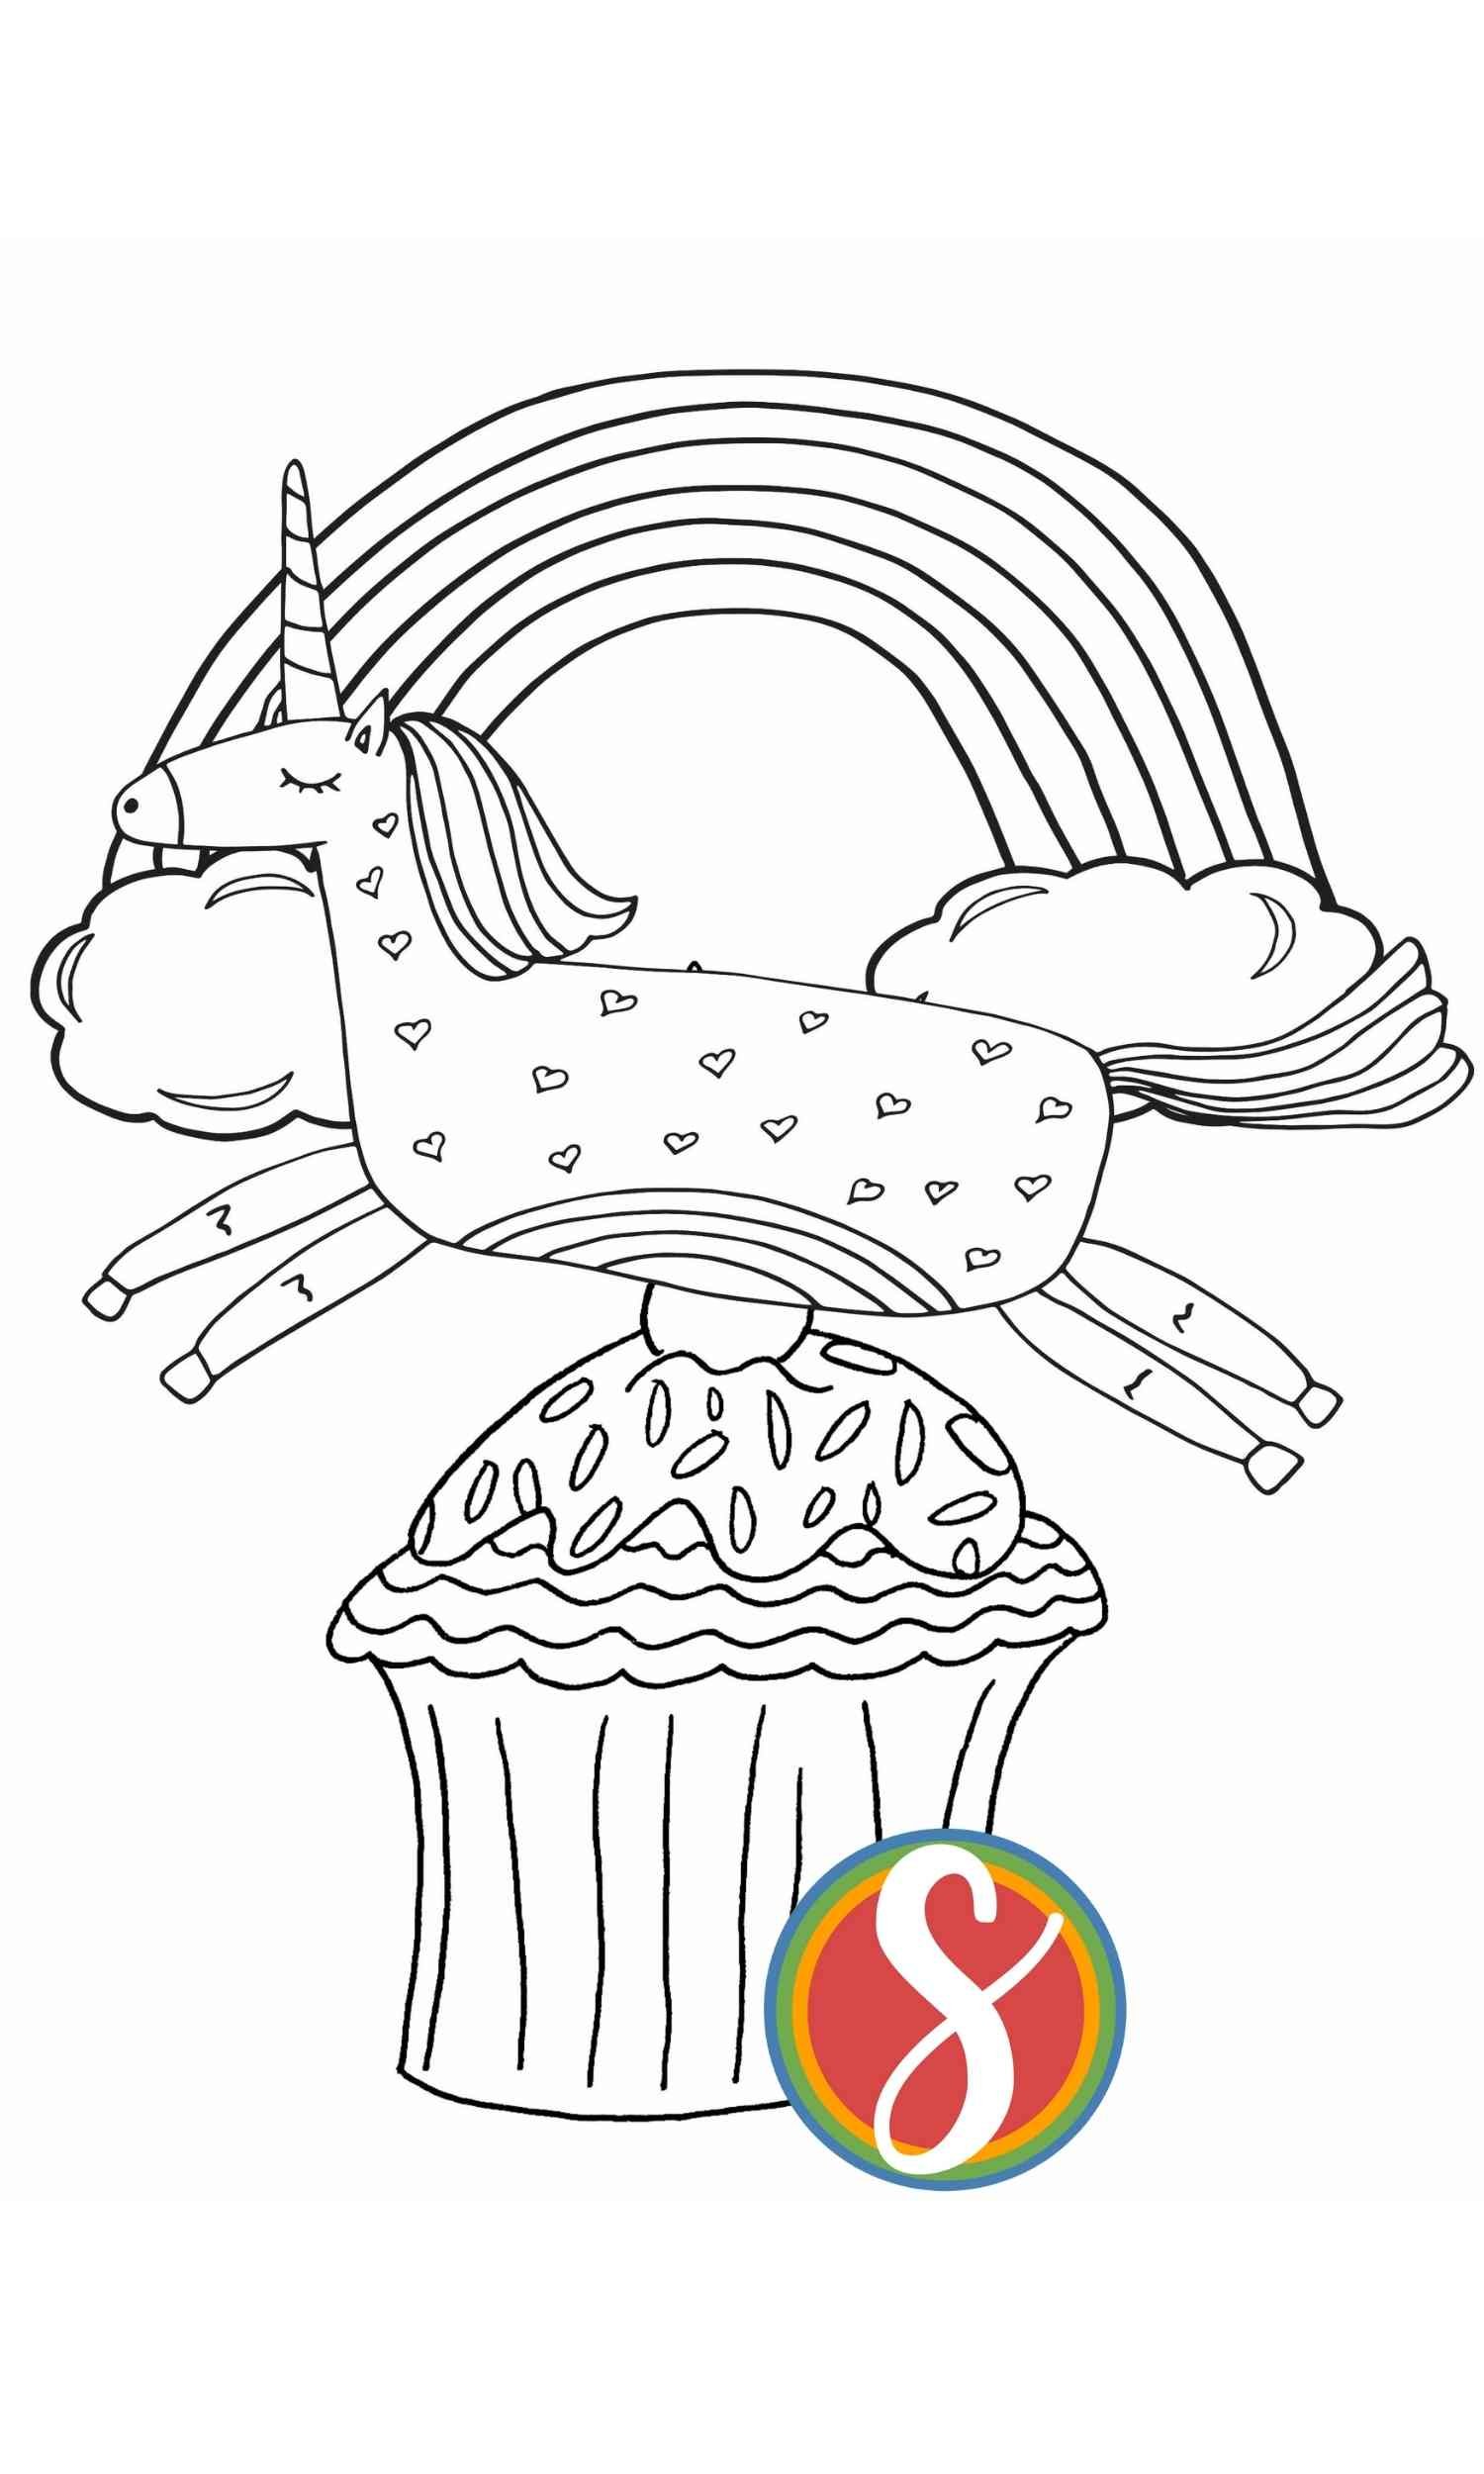 coloring page with unicorn in front of a rainbow jumping over a cupcake